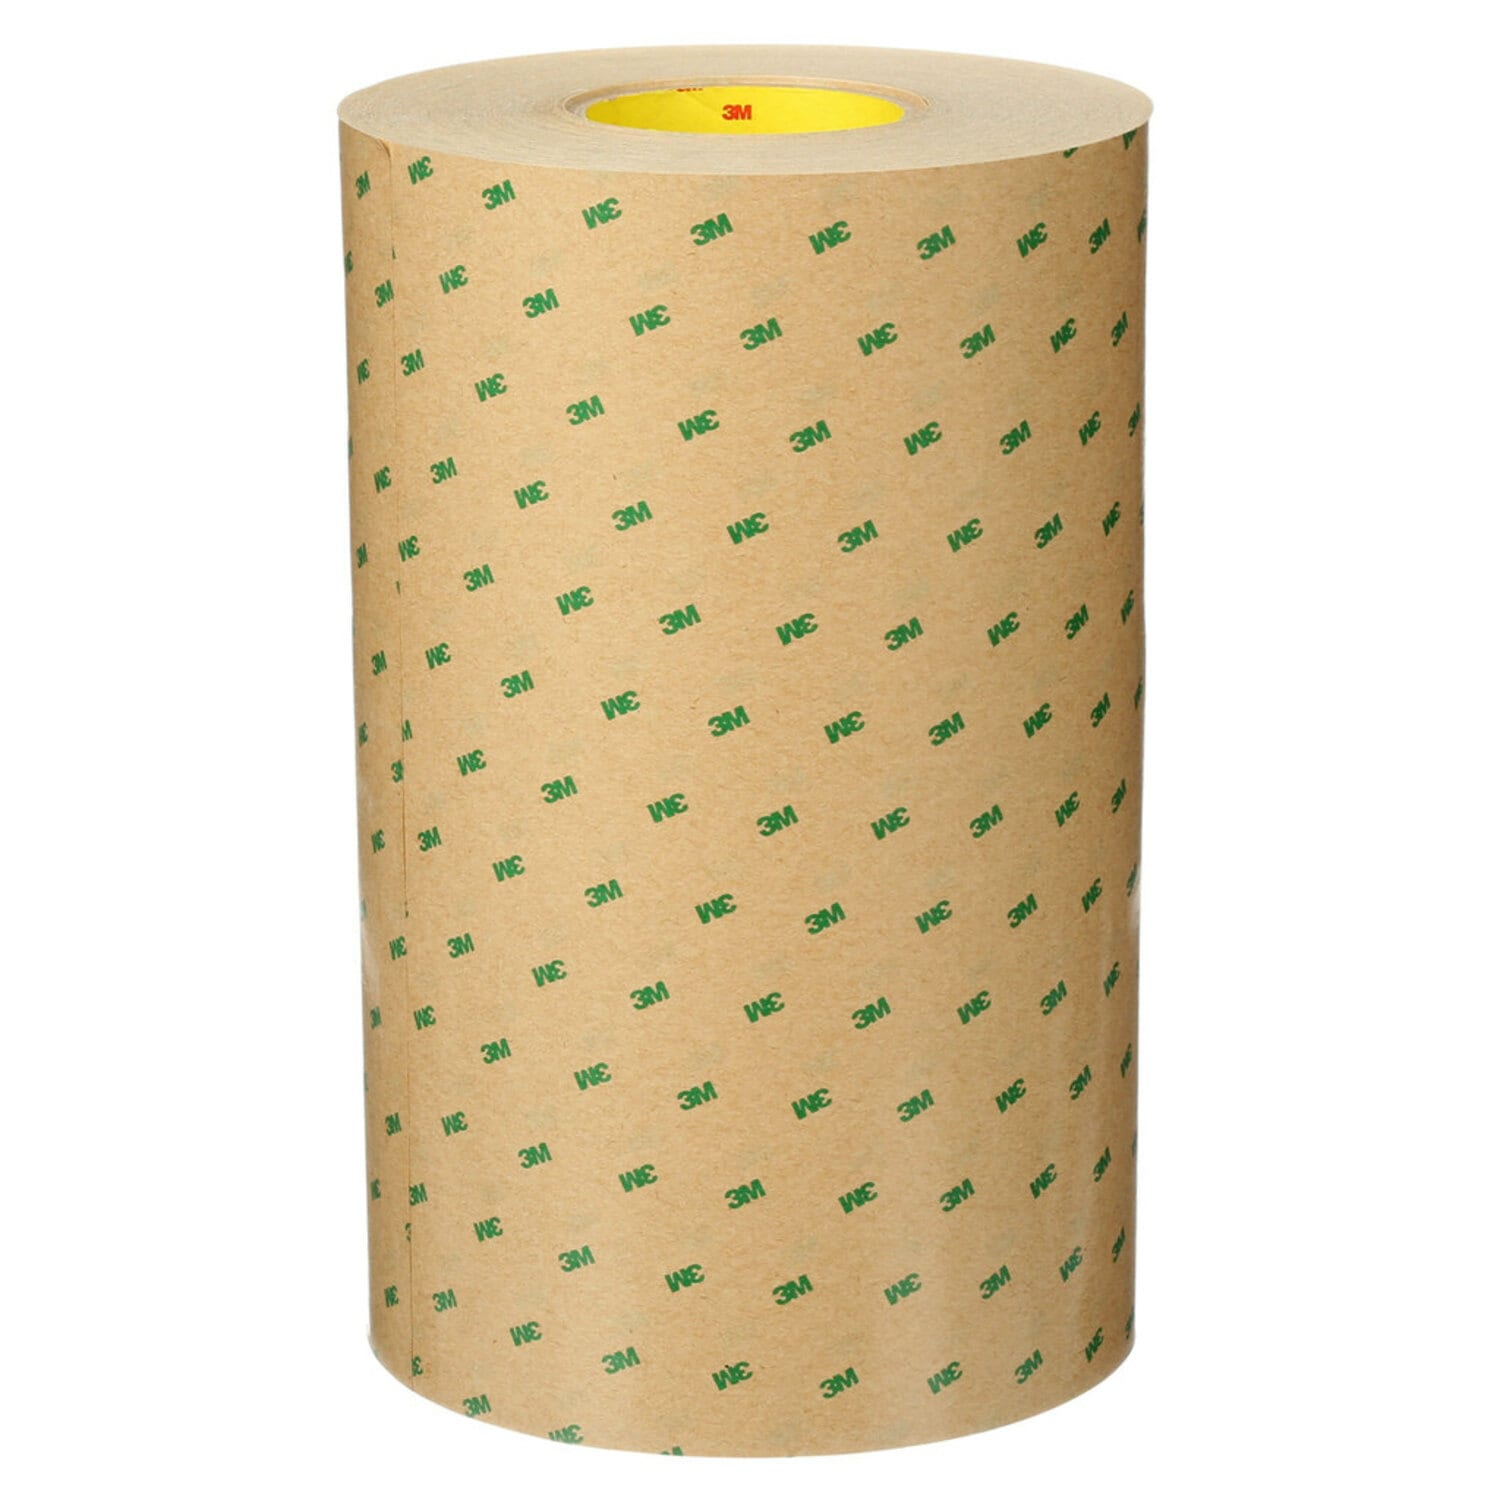 7000123341 - 3M Adhesive Transfer Tape 9471, Clear, 24 in x 180 yd, 2 mil, 1 roll
per case